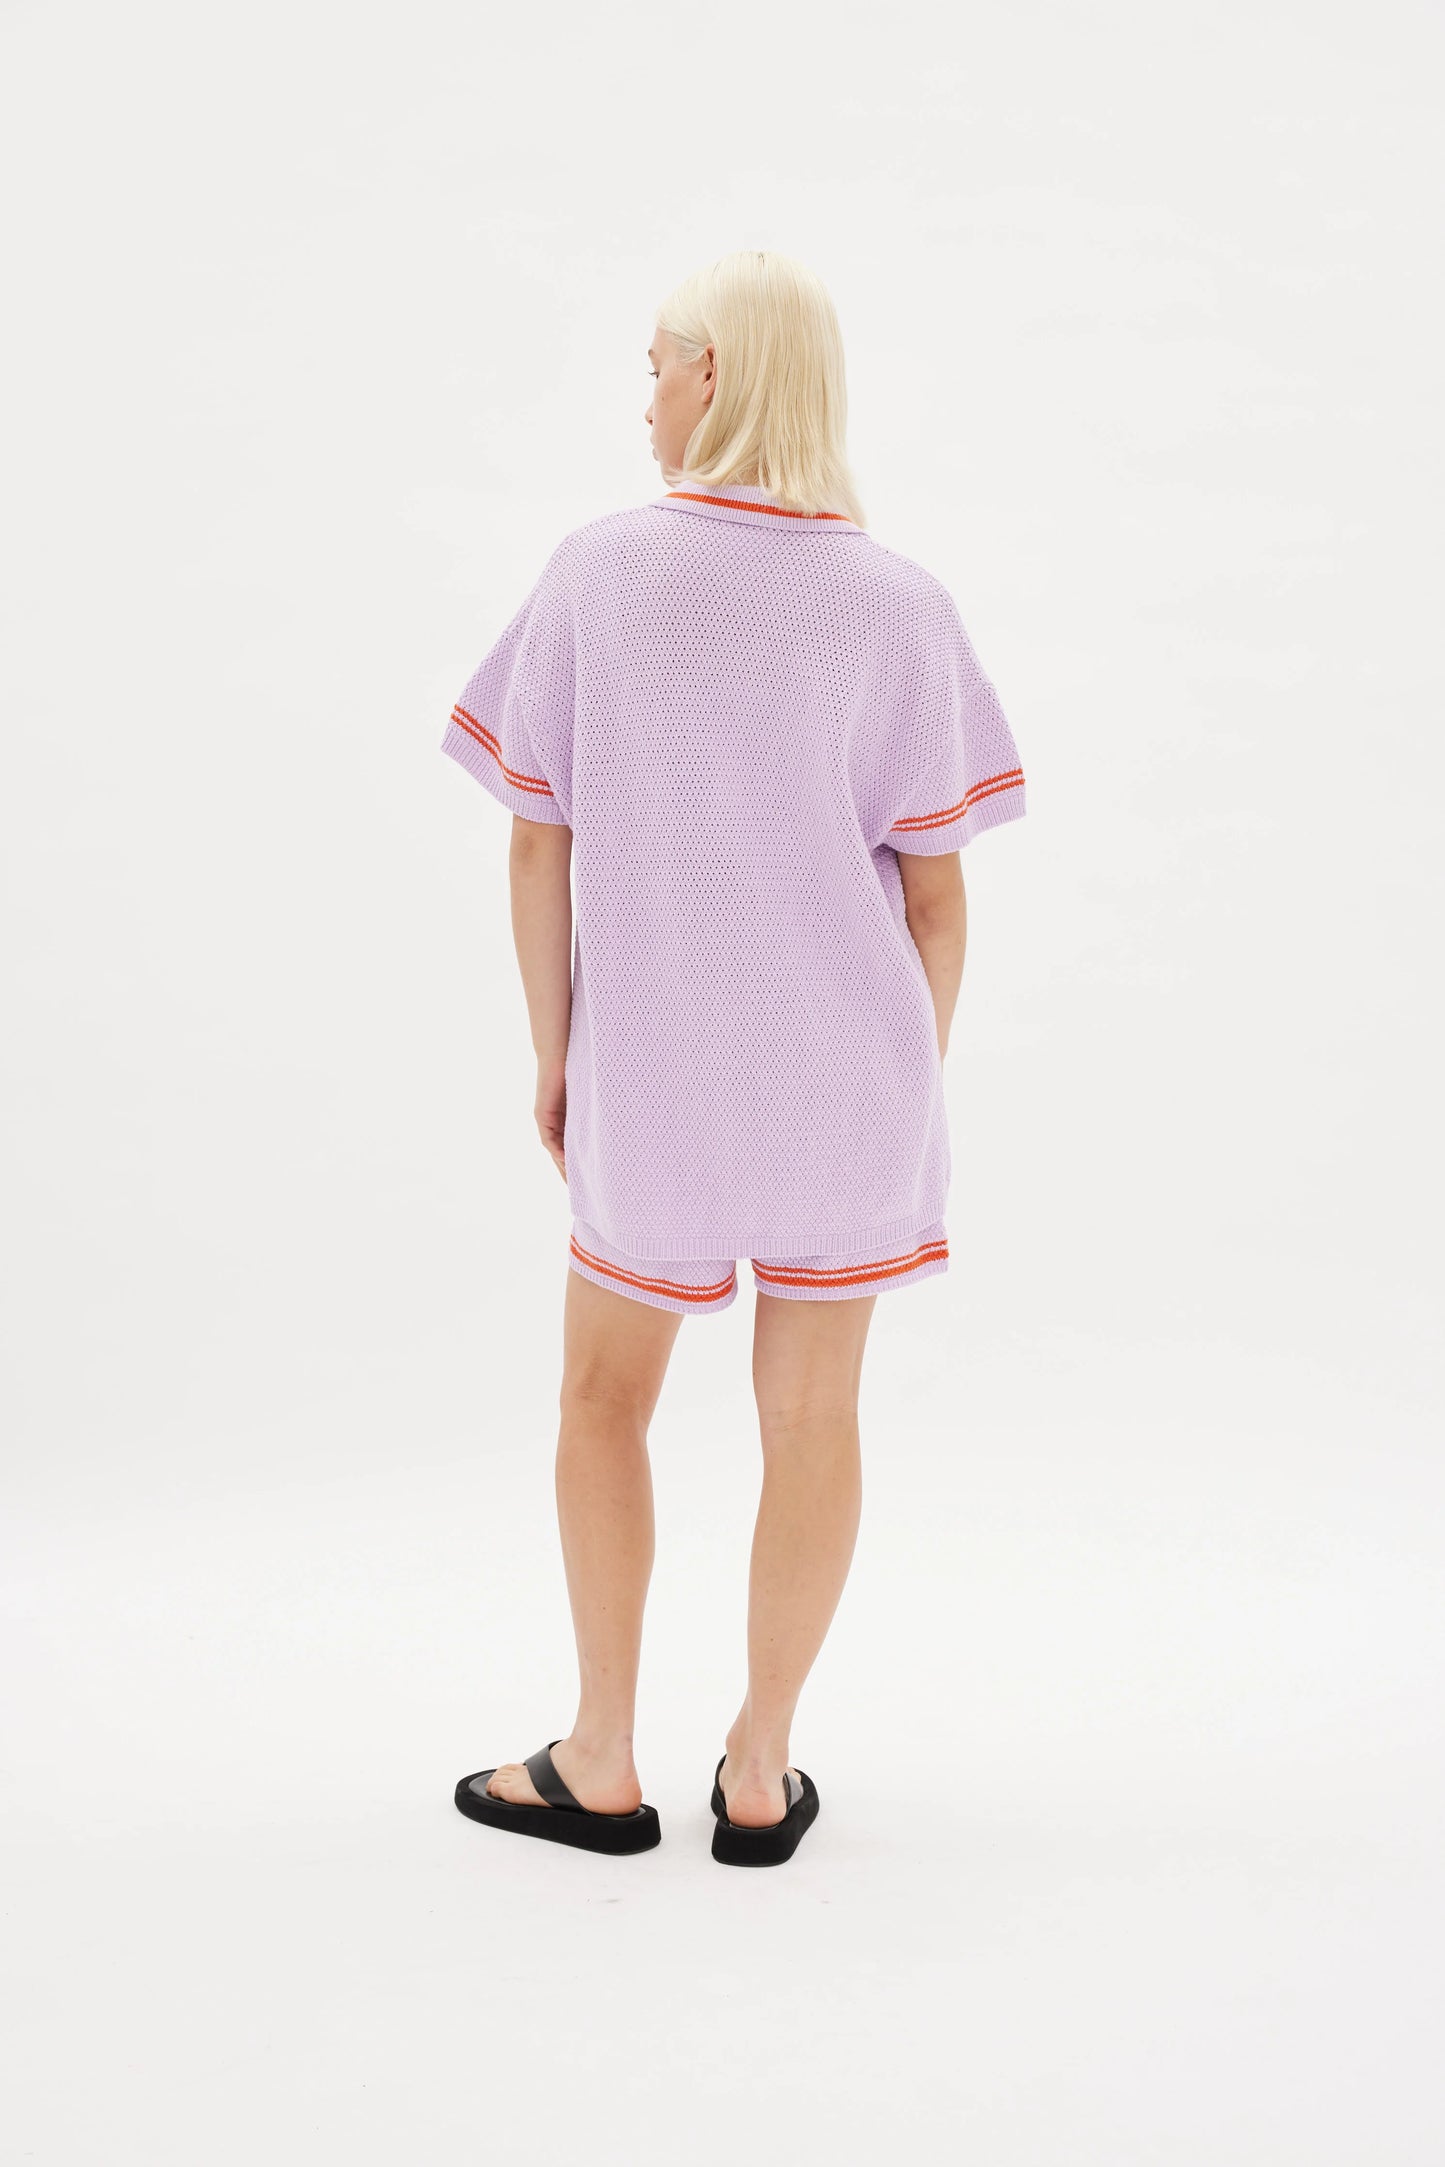 Soller Short Sleeve Knit Shirt in Neon Lilac and Coral